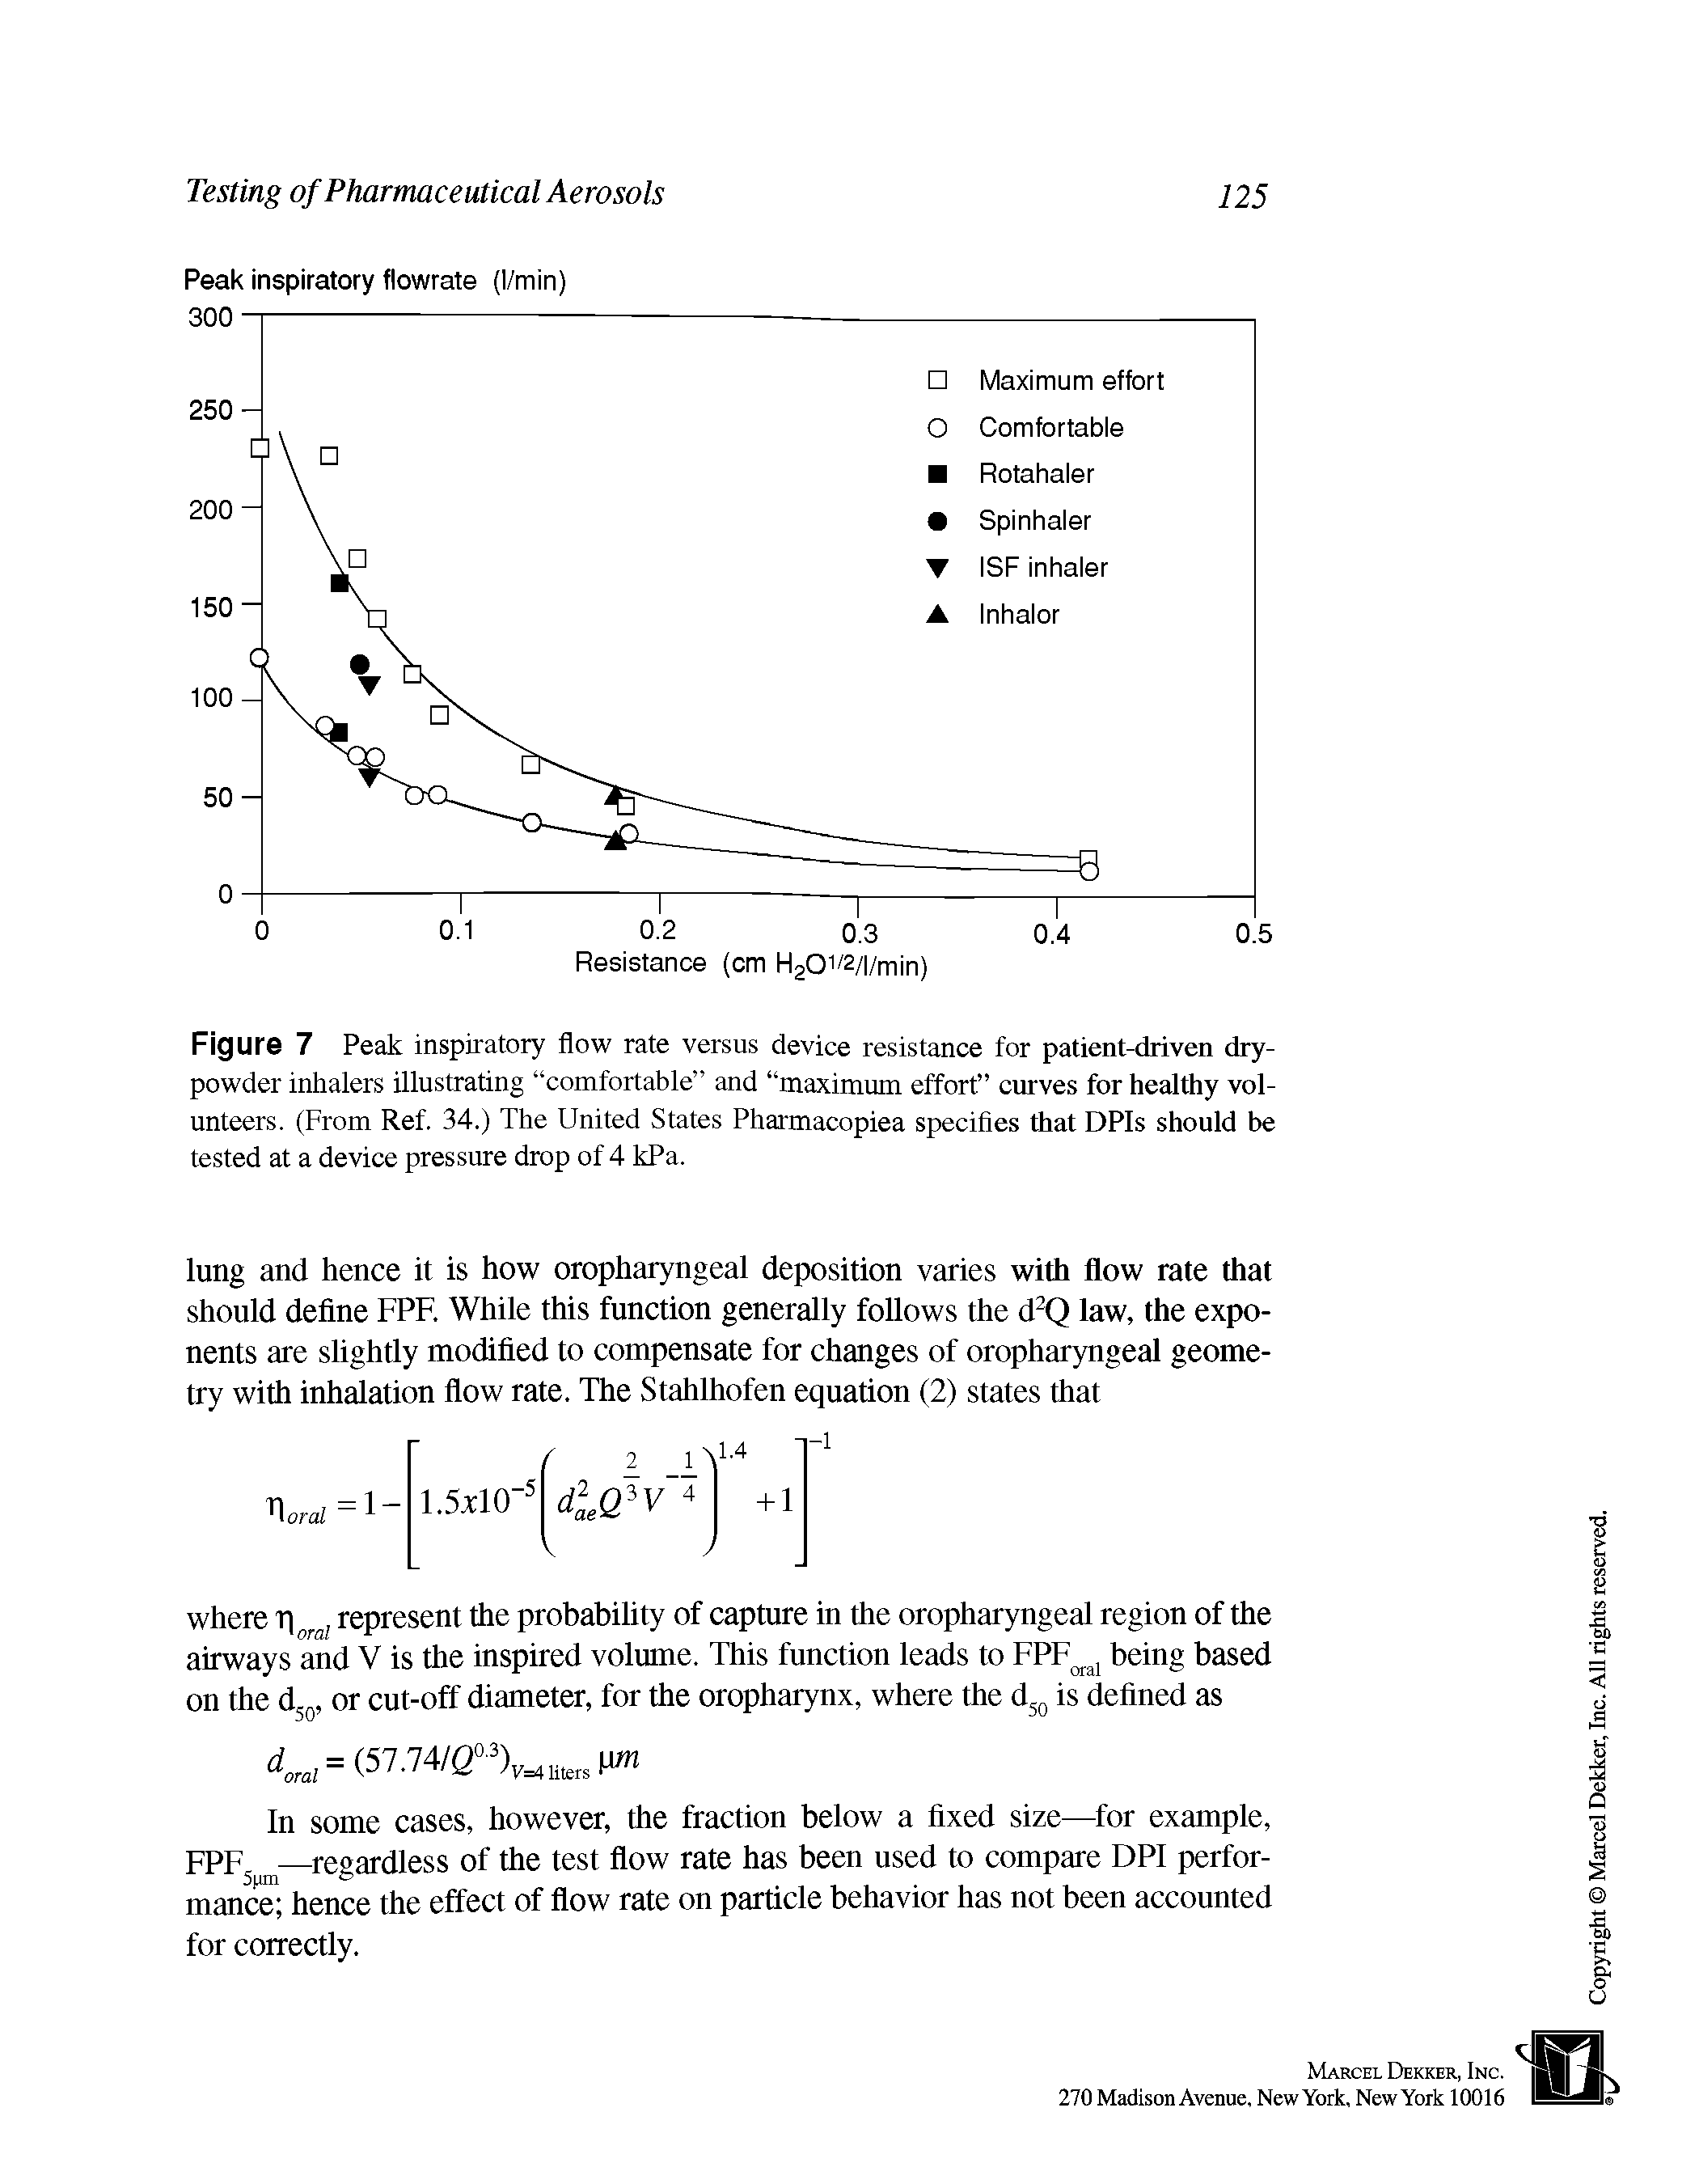 Figure 7 Peak inspiratory flow rate versus device resistance for patient-driven dry-powder inhalers illustrating comfortable and maximum effort curves for healthy volunteers. (From Ref. 34.) The United States Pharmacopiea specifies that DPIs should be tested at a device pressure drop of 4 kPa.